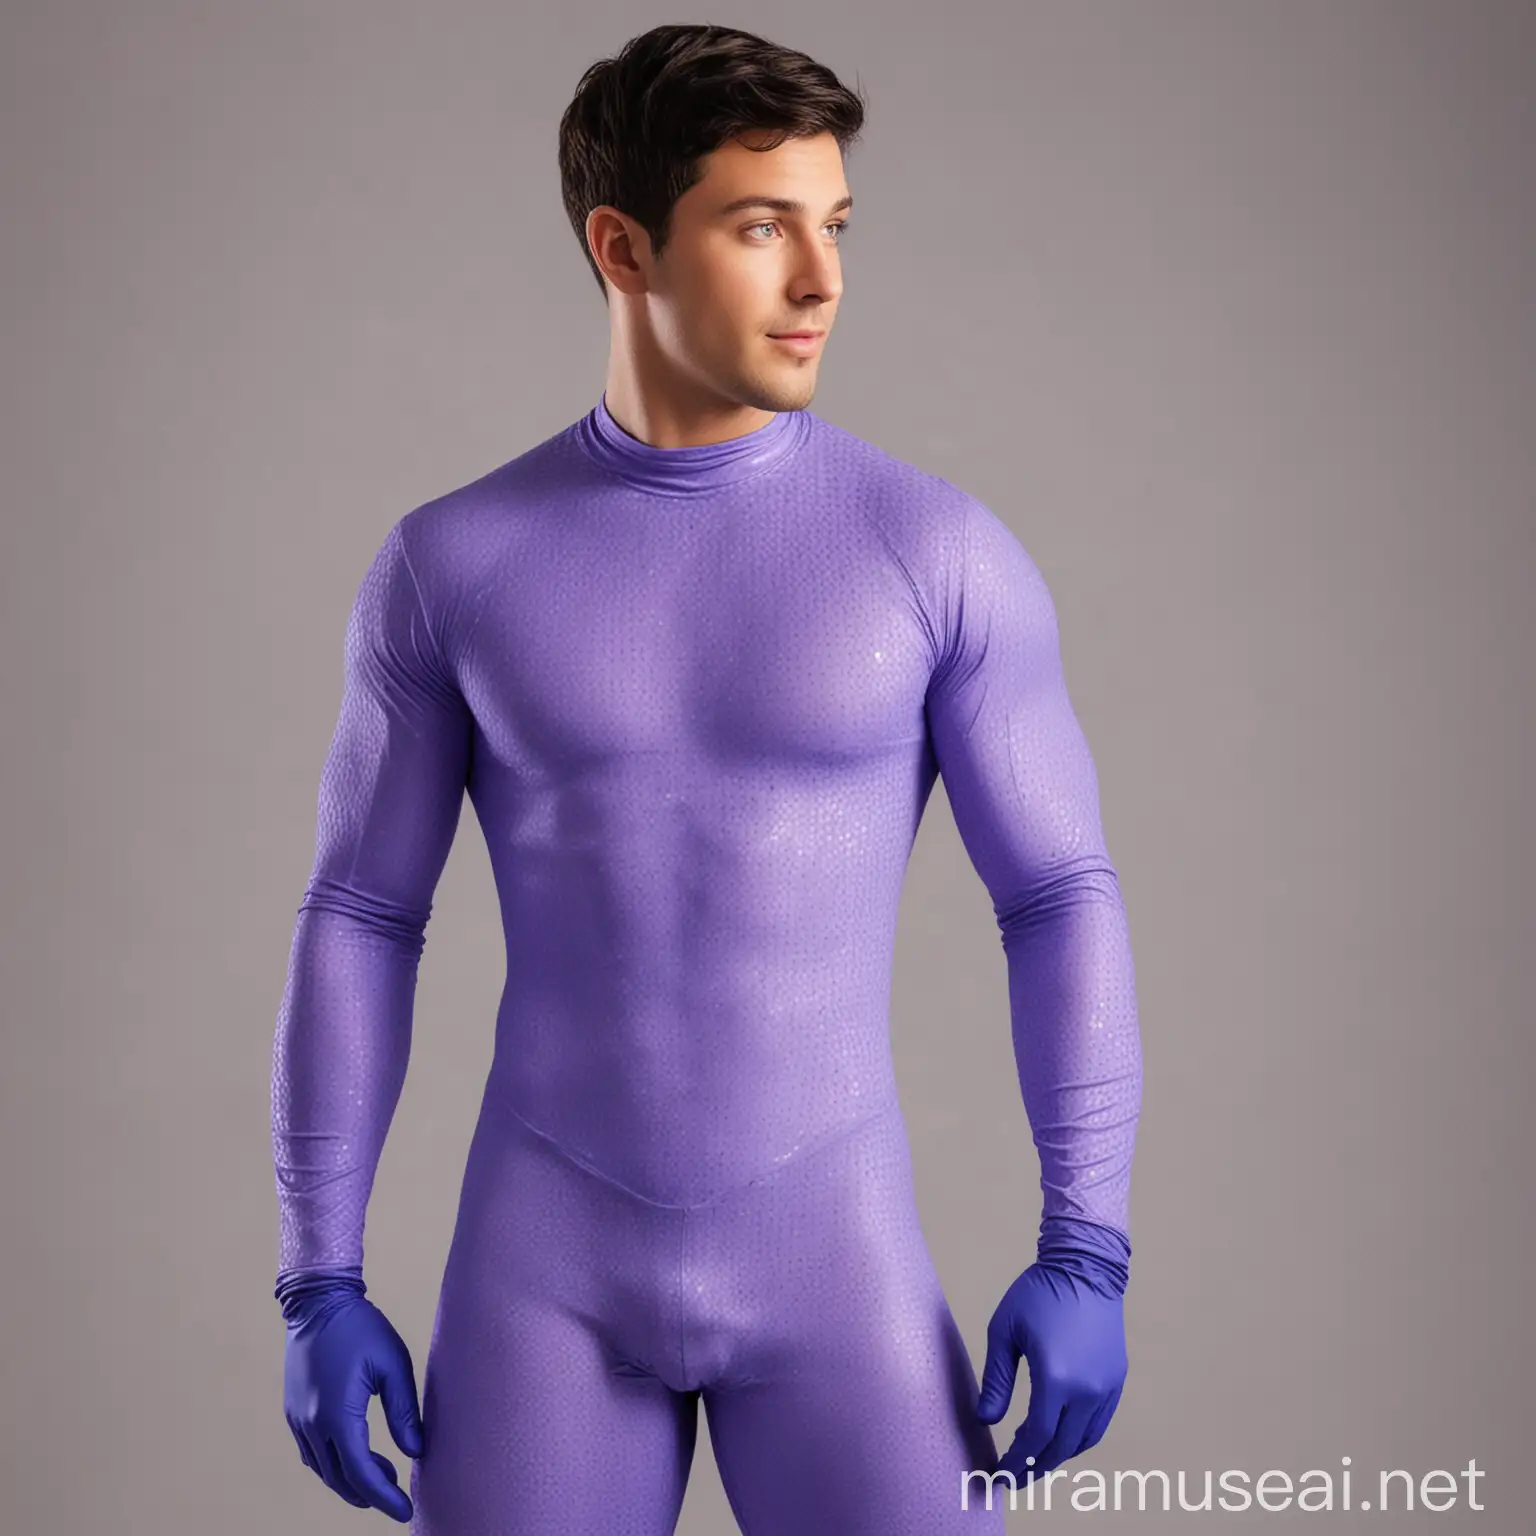 Handsome  27 year old American man, with short black hair; hazel eyes, pointed nose; wearing bright periwinkle hero spandex bodysuit and gloves with little honeycomb pattern; rear view.